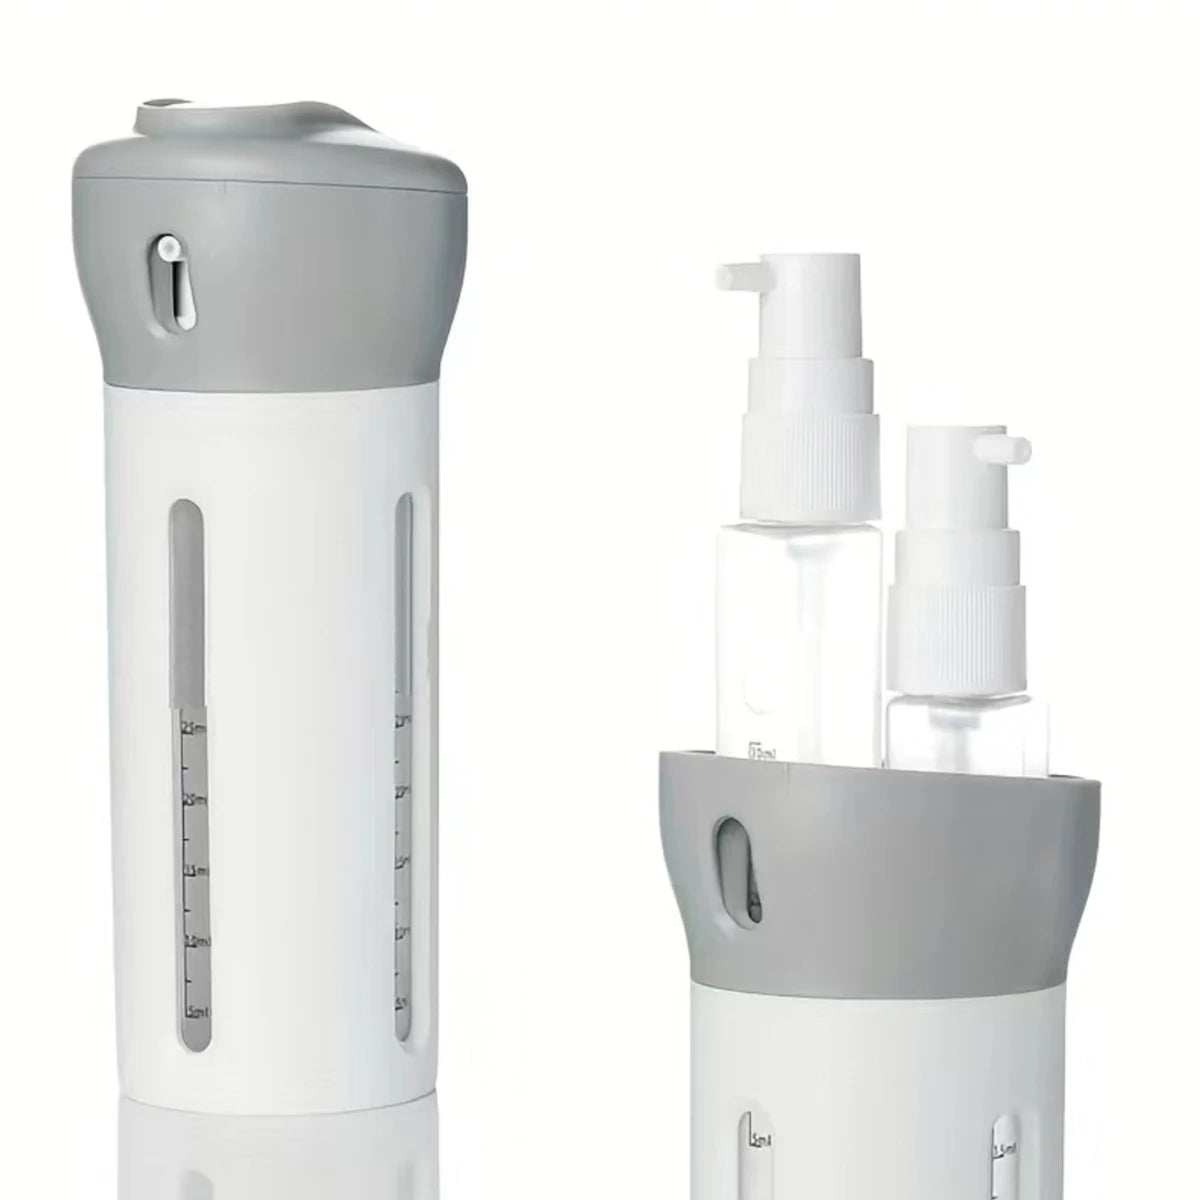 4 x 1 MultiOption Travel Dispenser: Compact Bottle for Shampoo, Conditioner, Lotion and Perfume